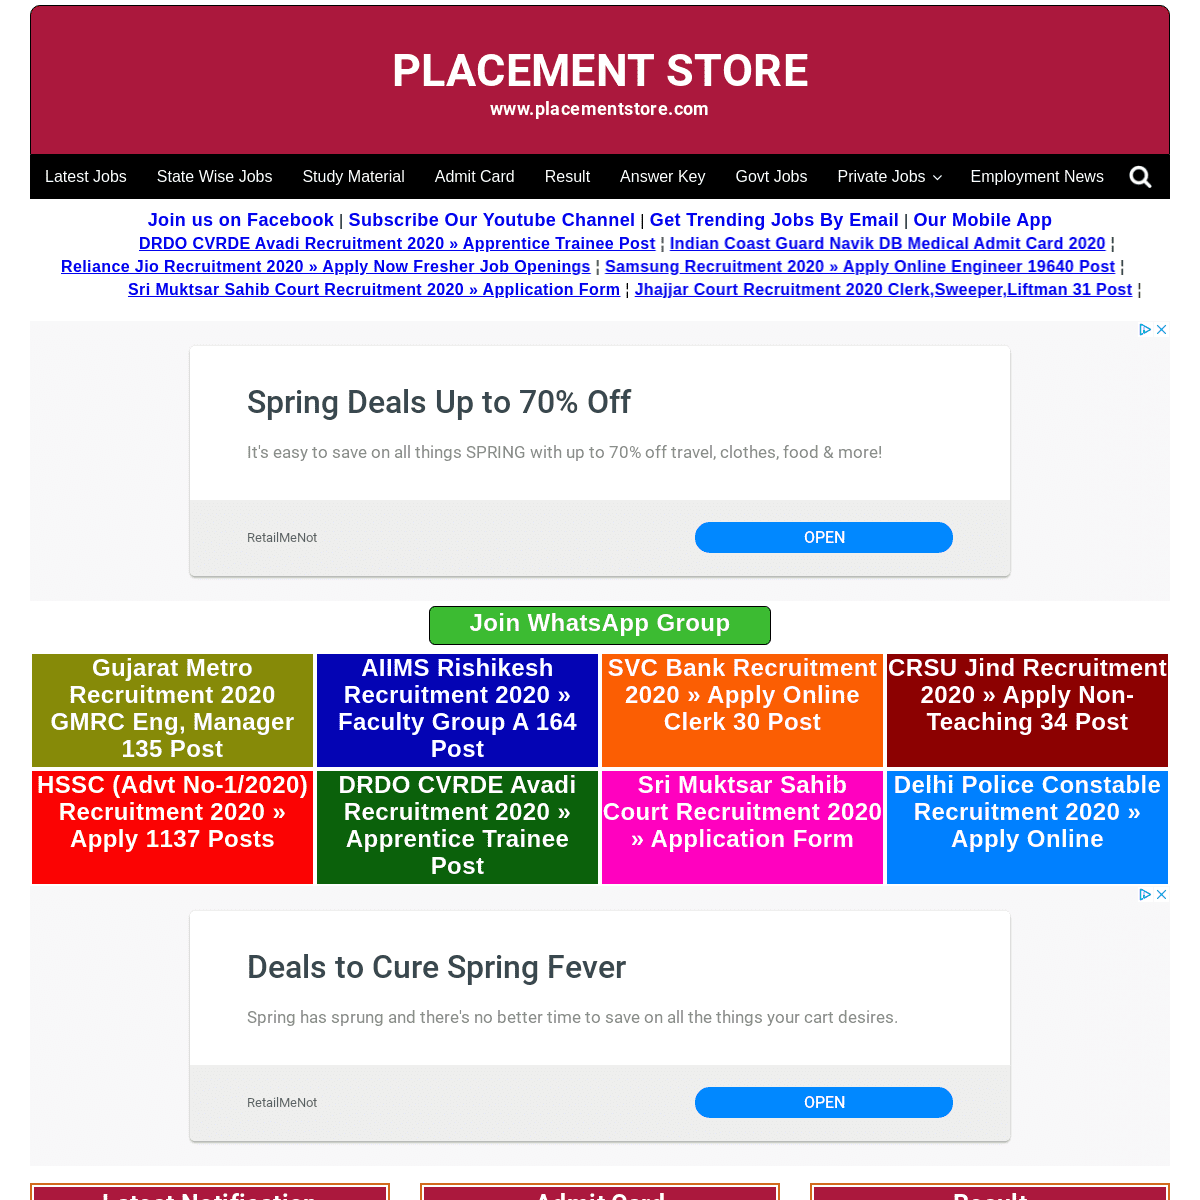 A complete backup of placementstore.com